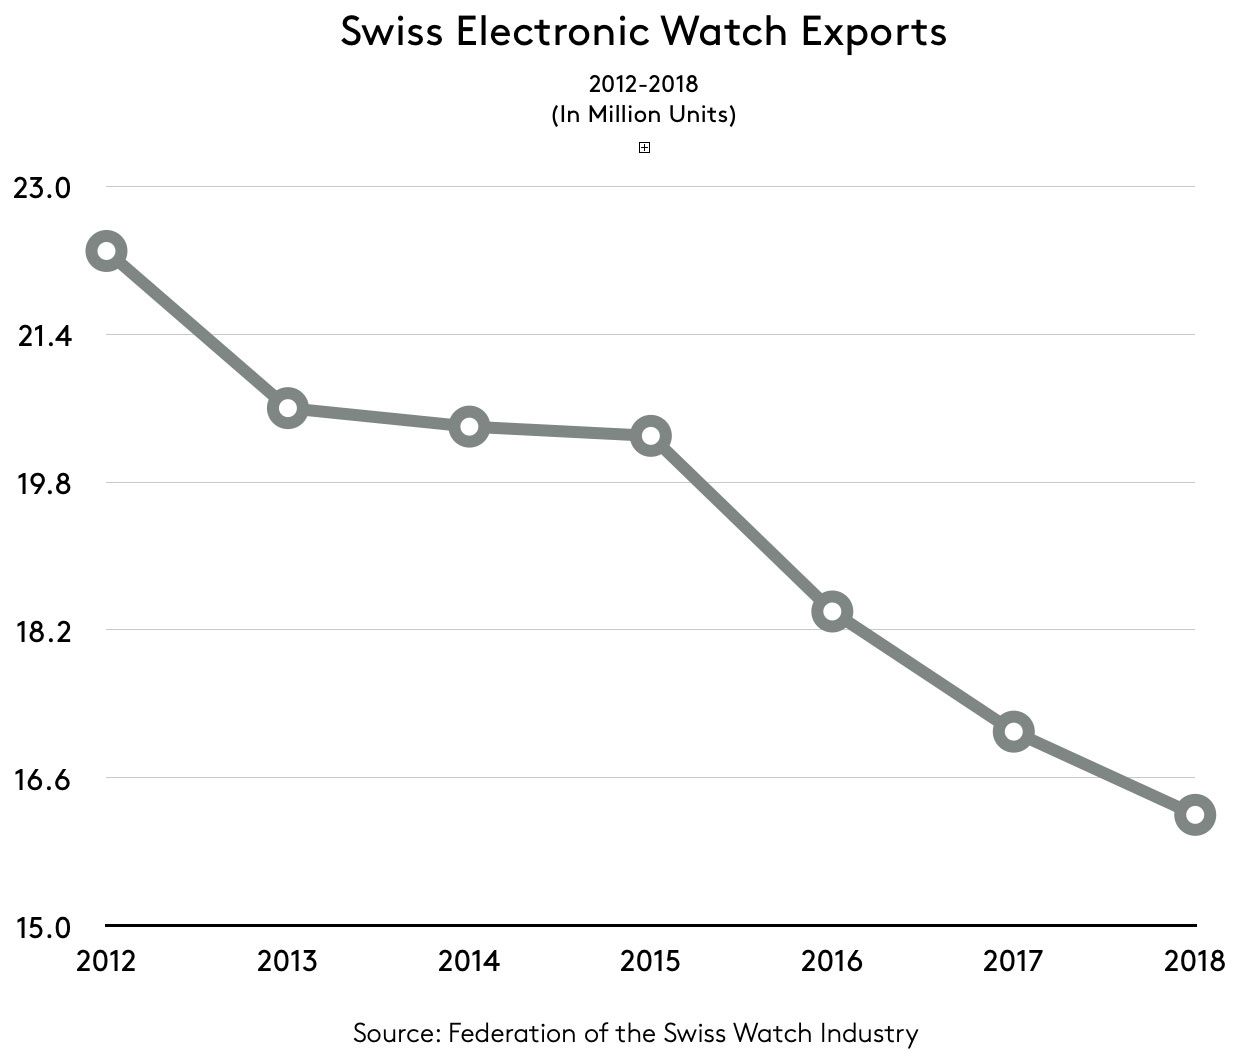  swiss electronic watch export 2012 to 2018